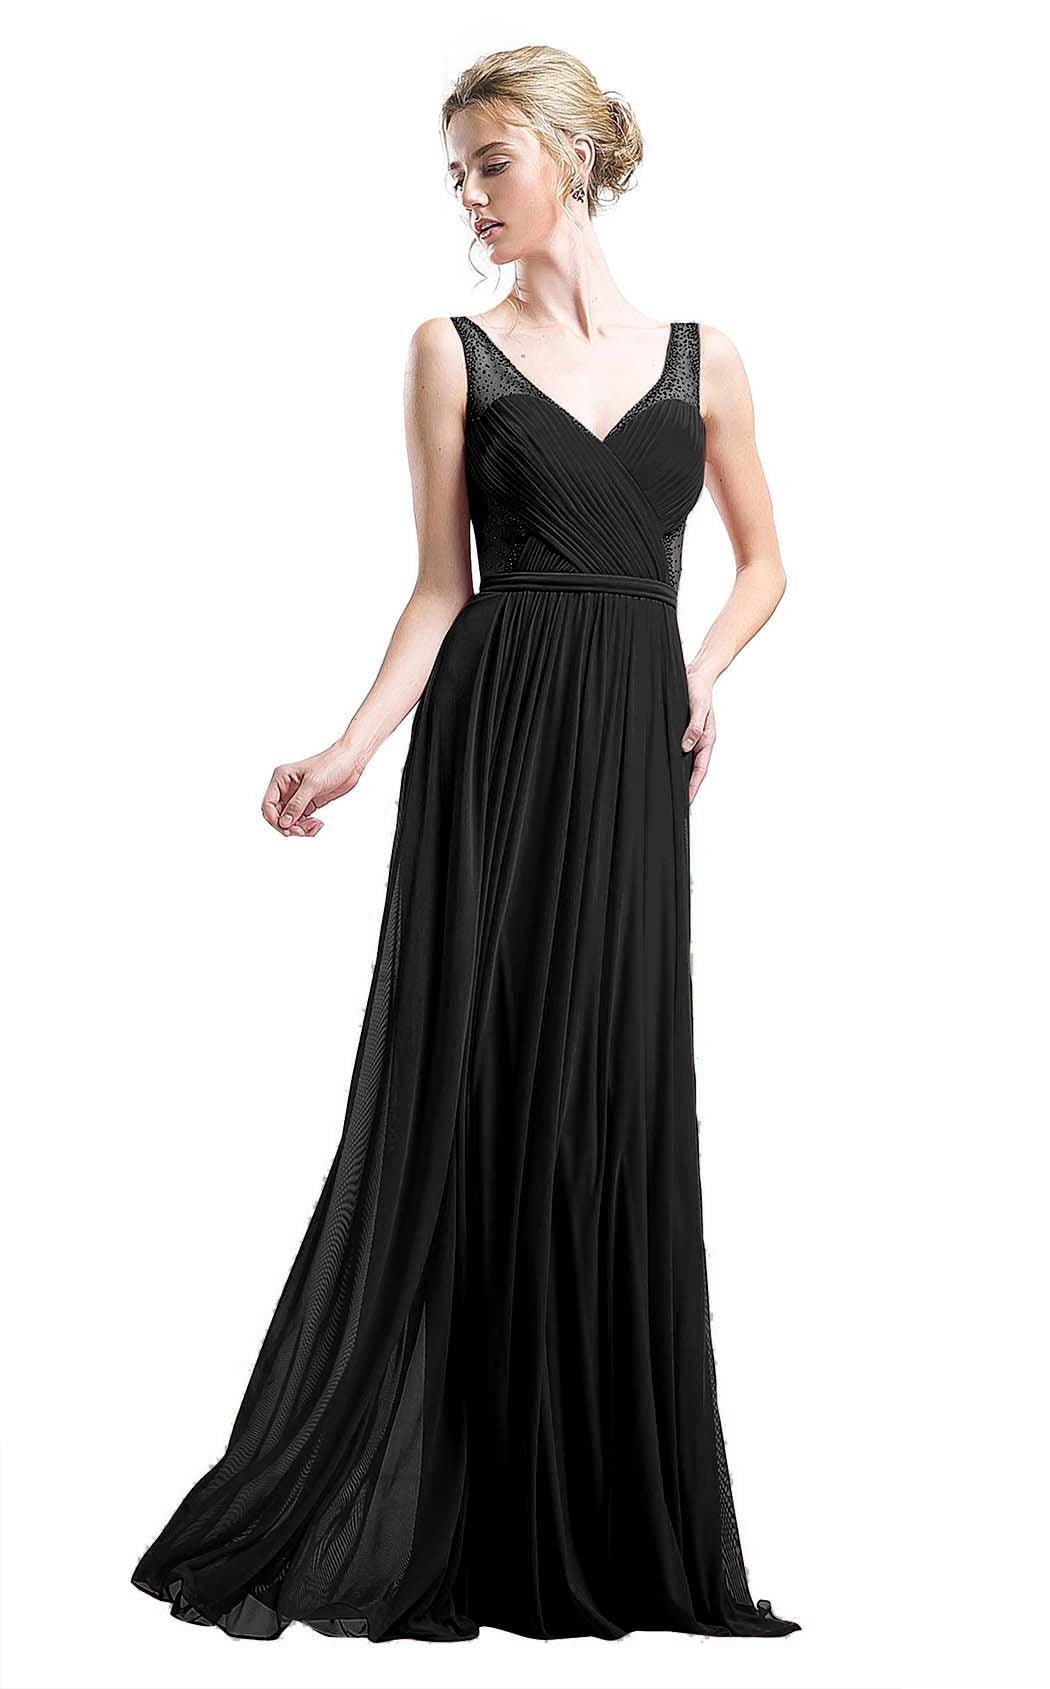 Black Designer Dress for Any Occasion | NewYorkDress – Page 2